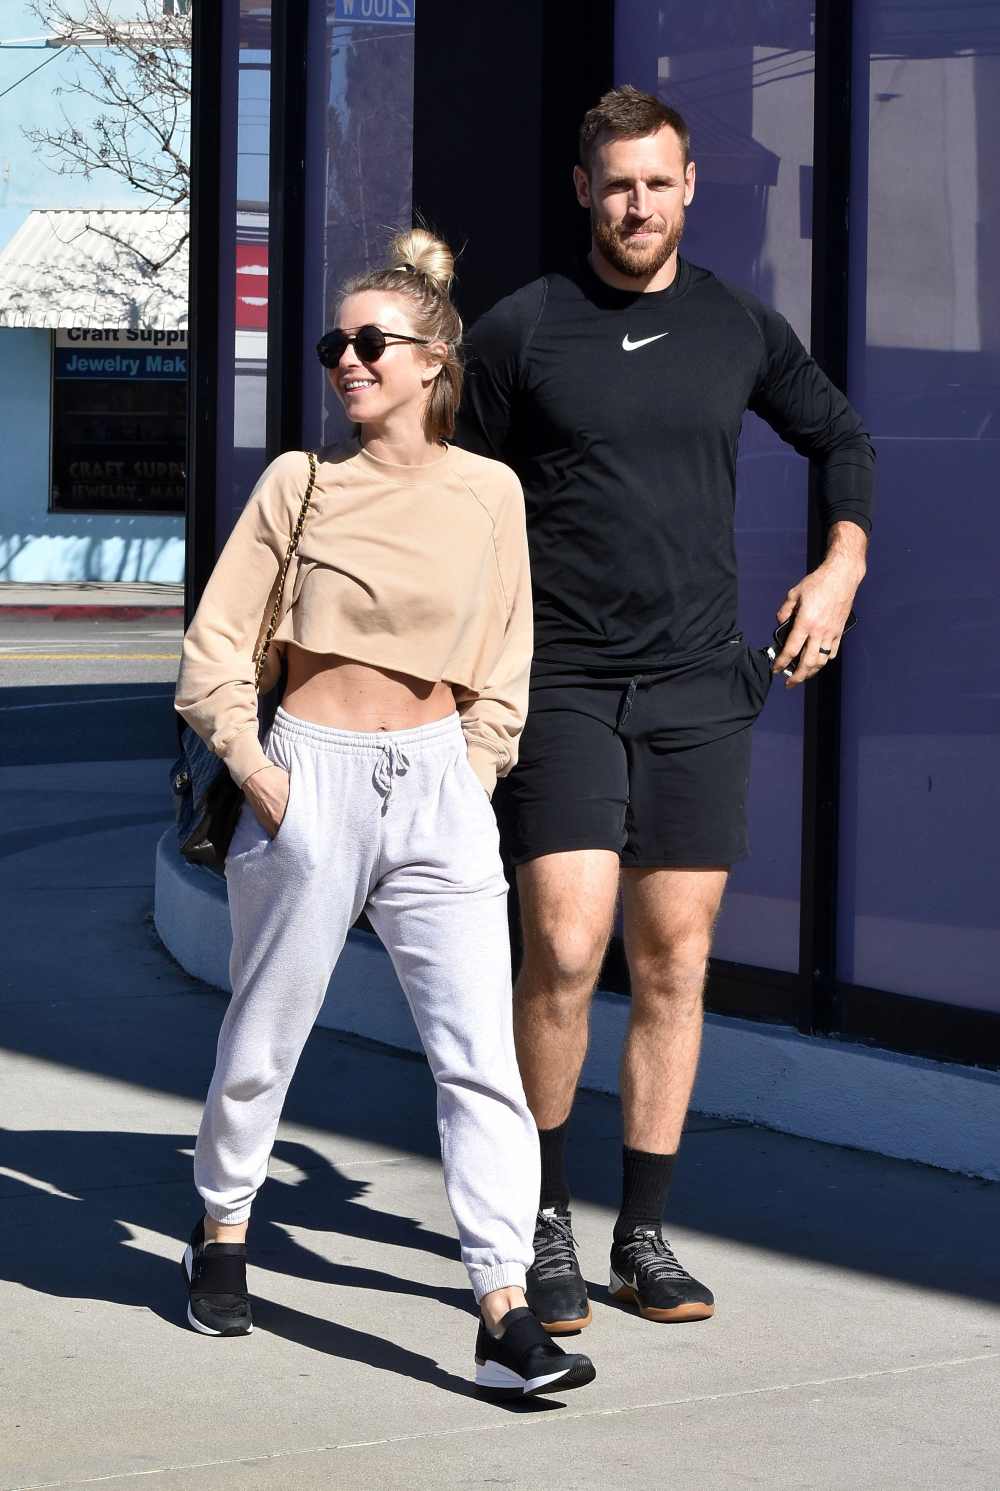 Julianne Hough and Brooks Laich Spotted Together Amid Split Rumors